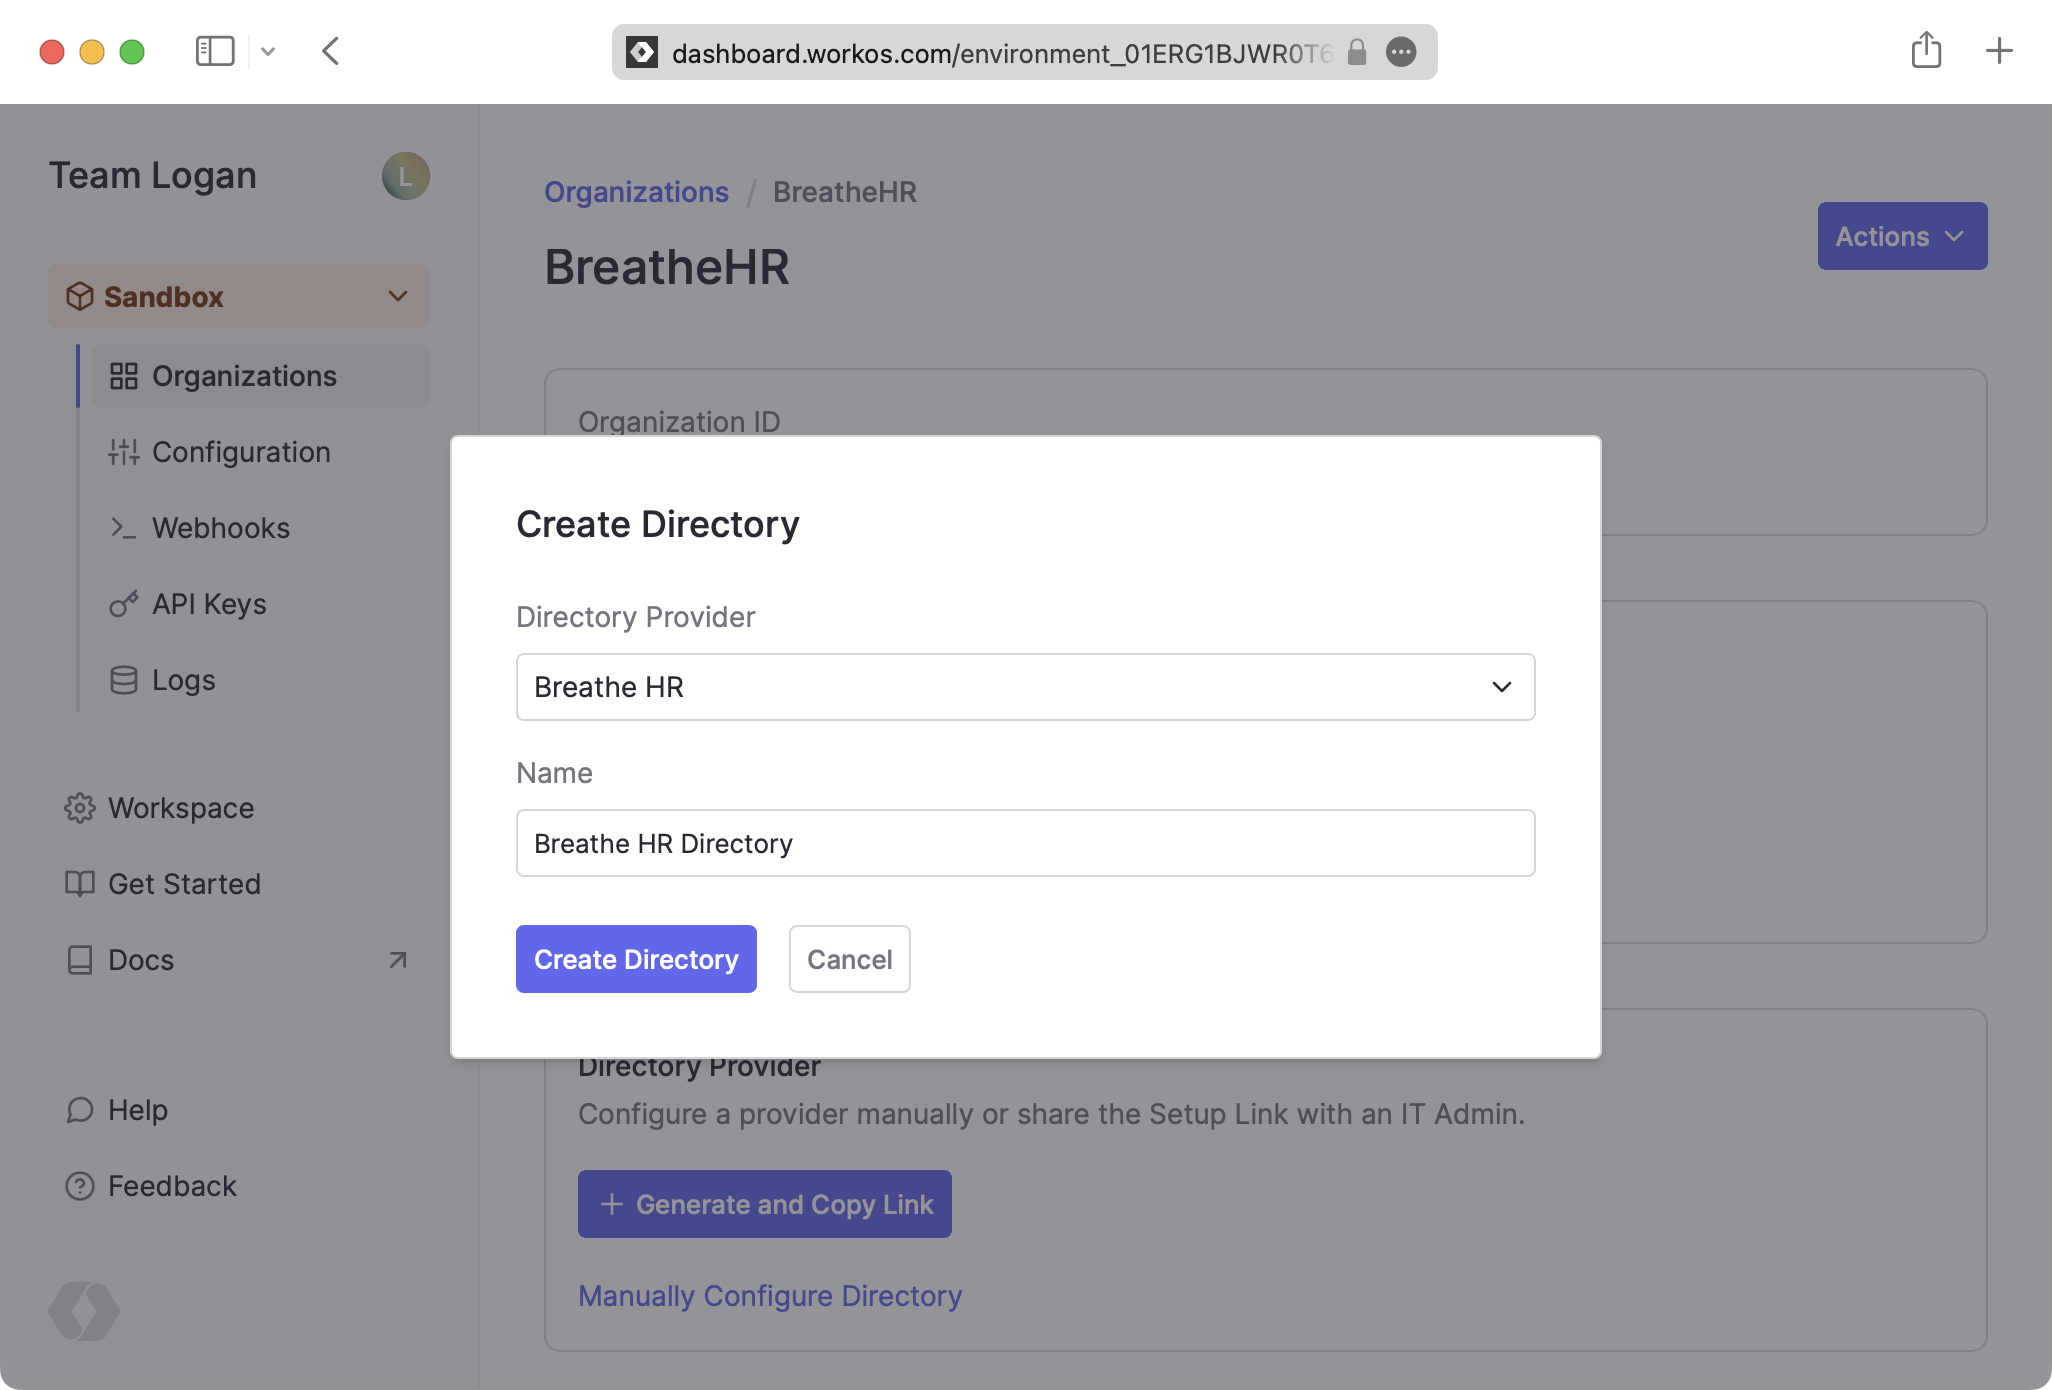 A screenshot showing the configuration of the "Create Directory" modal to create a Breathe HR Directory in the WorkOS dashboard.